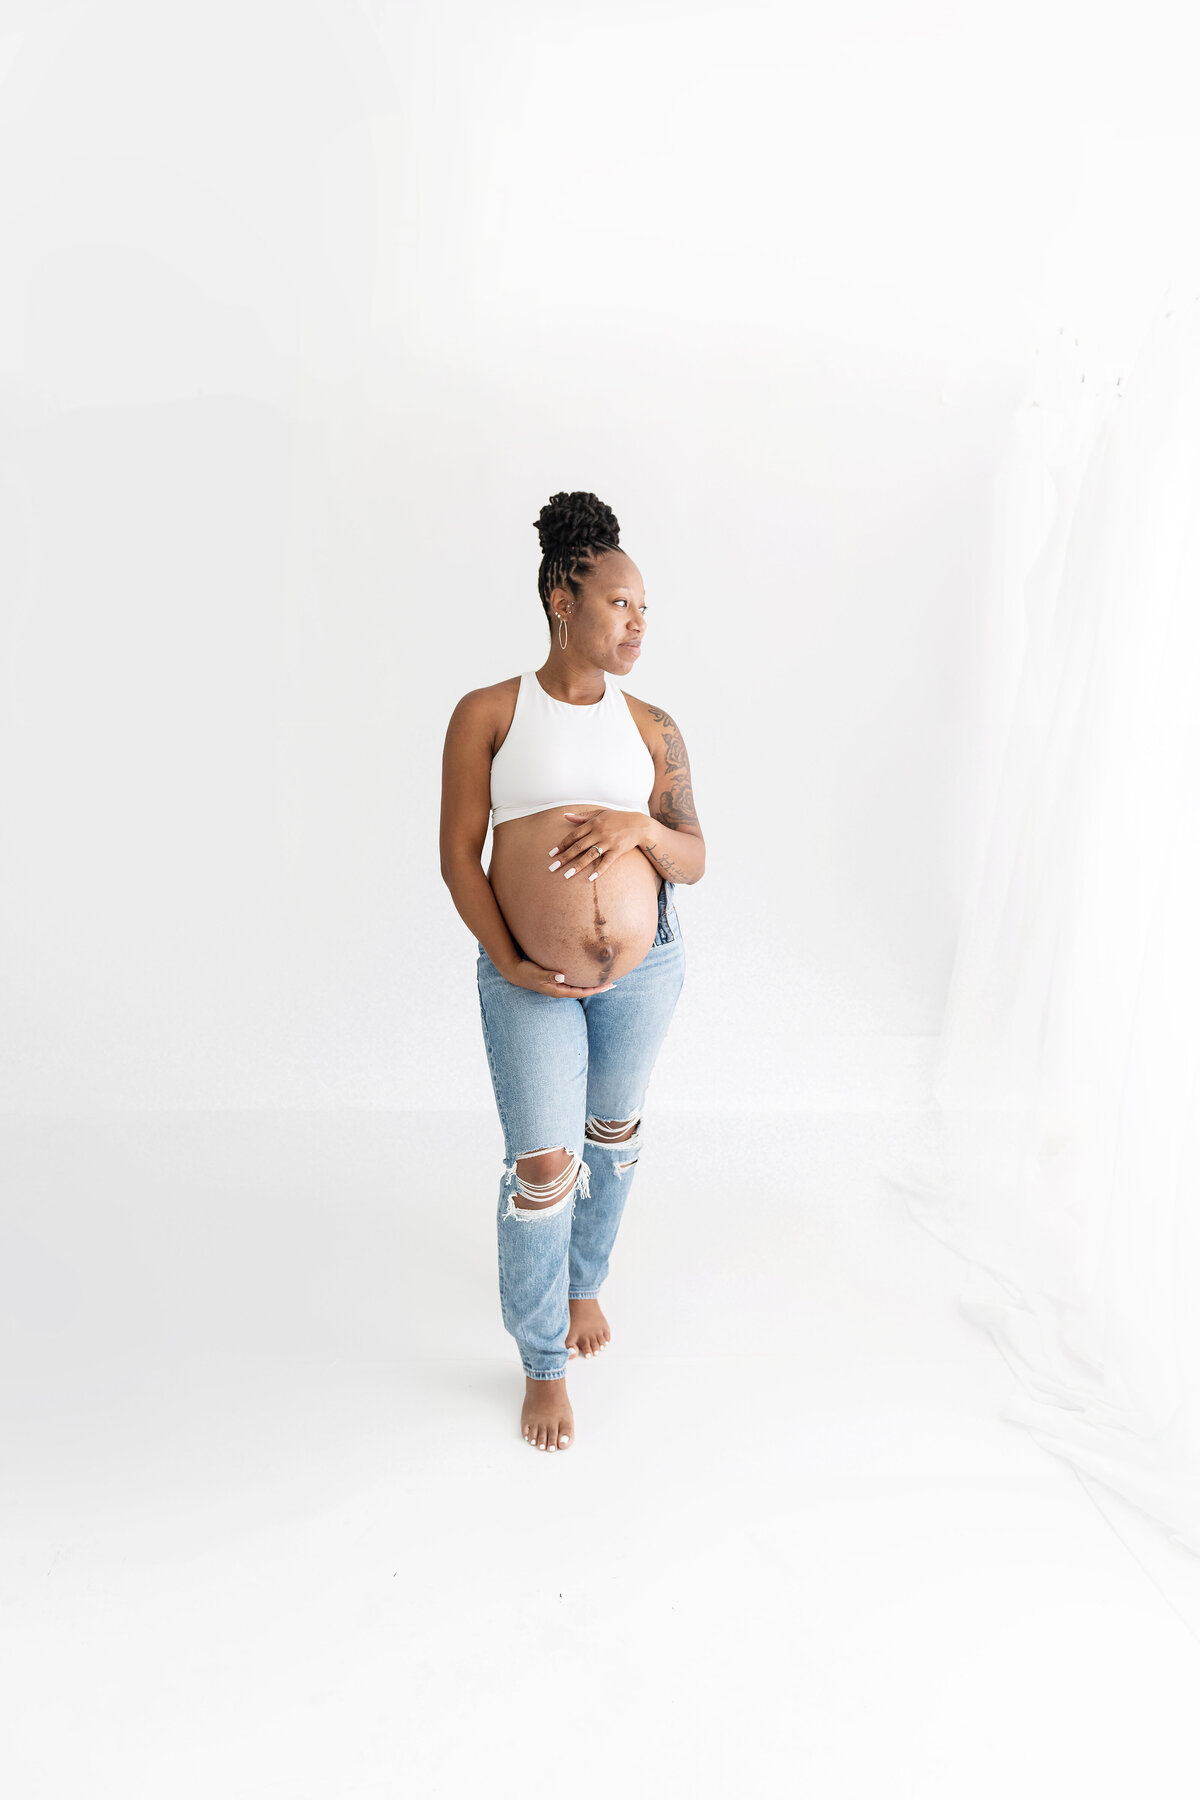 A mother to be stands in a studio holding her exposed bump in jeans and a white top